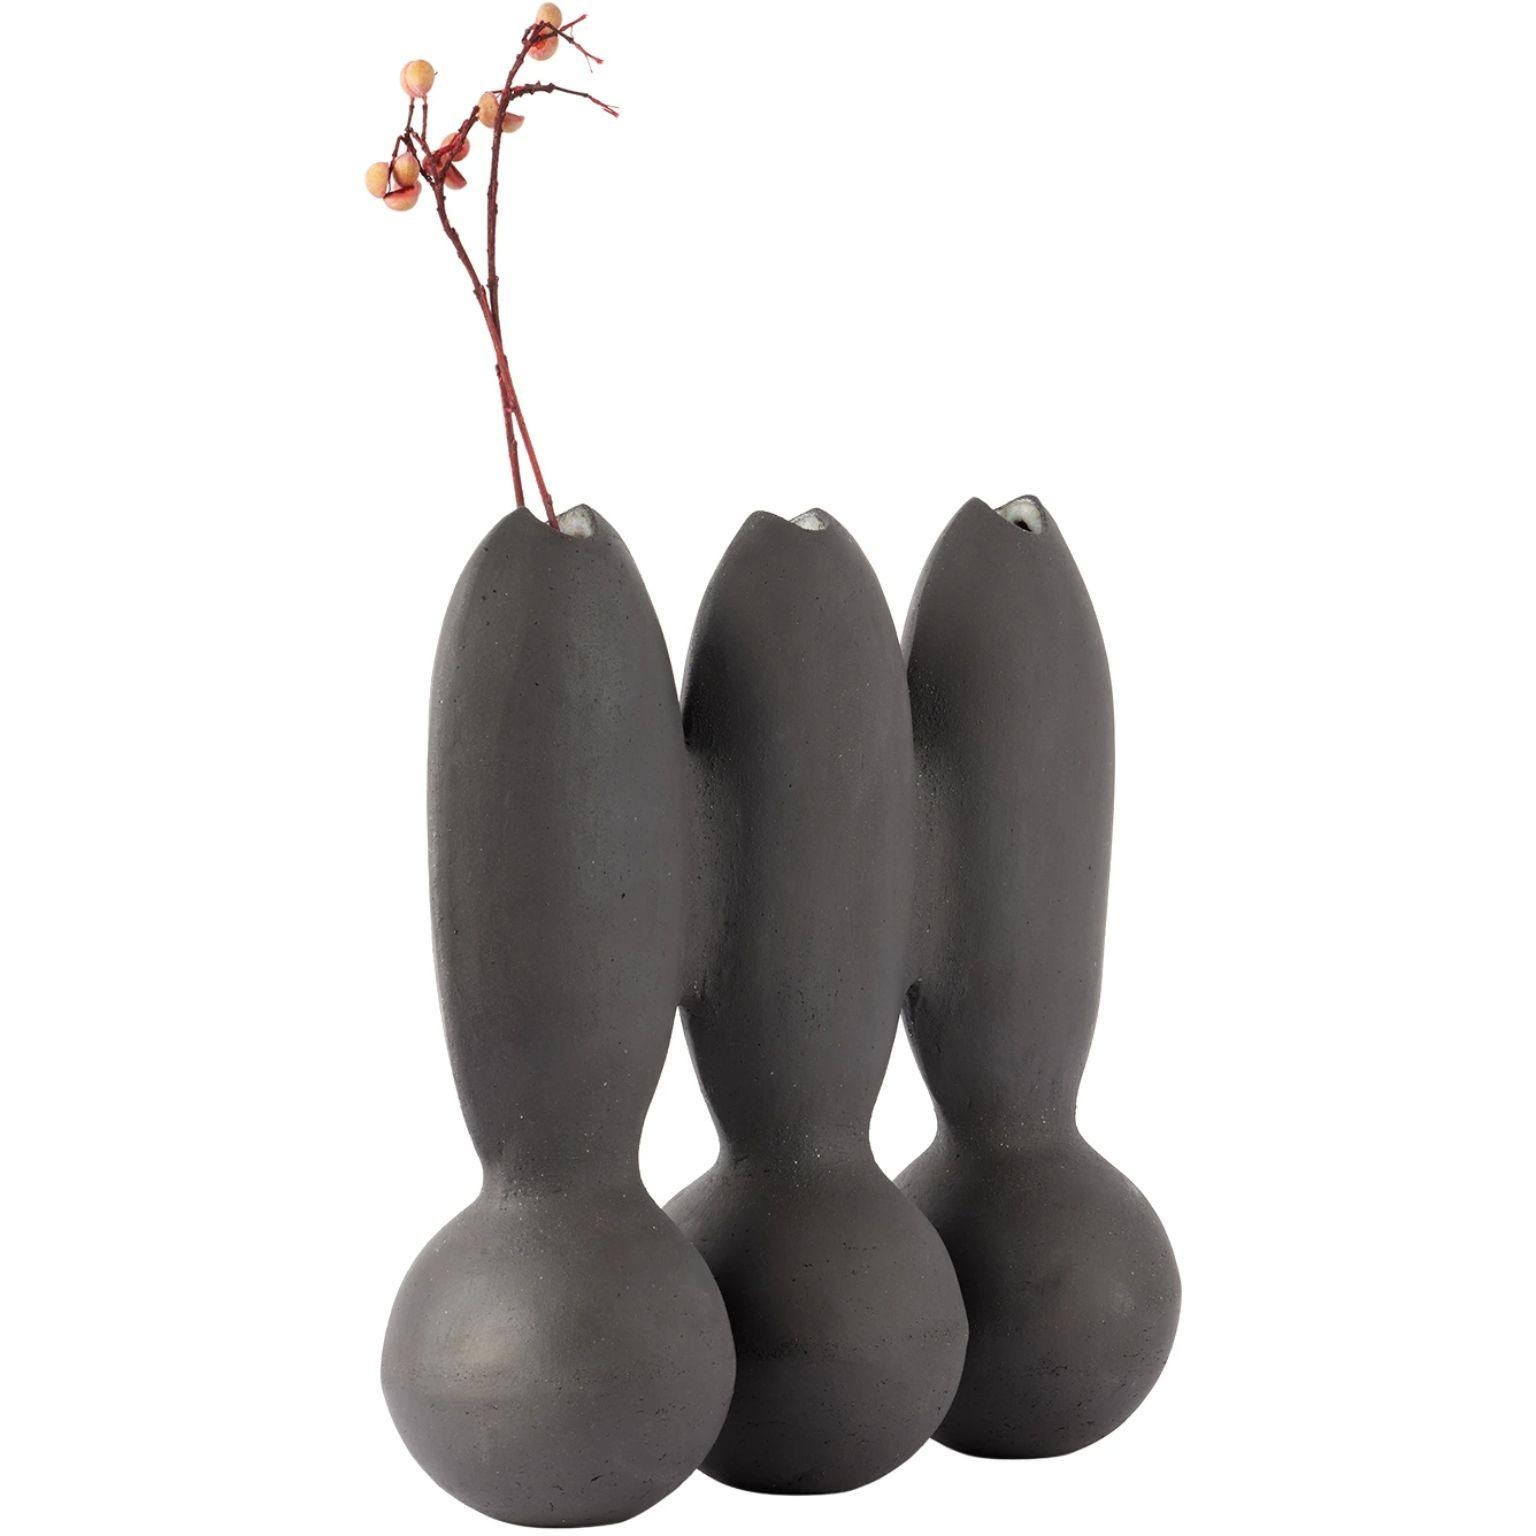 Itera Black Triple Vase by Ia Kutateladze
One Of  A Kind.
Dimensions: D 10 x W 30 x H 27 cm.
Materials: Raw black clay.

Handcrafted sculptural ceramic vase in black. Three openings at the top. Please note coloration may vary. Each piece is one of a